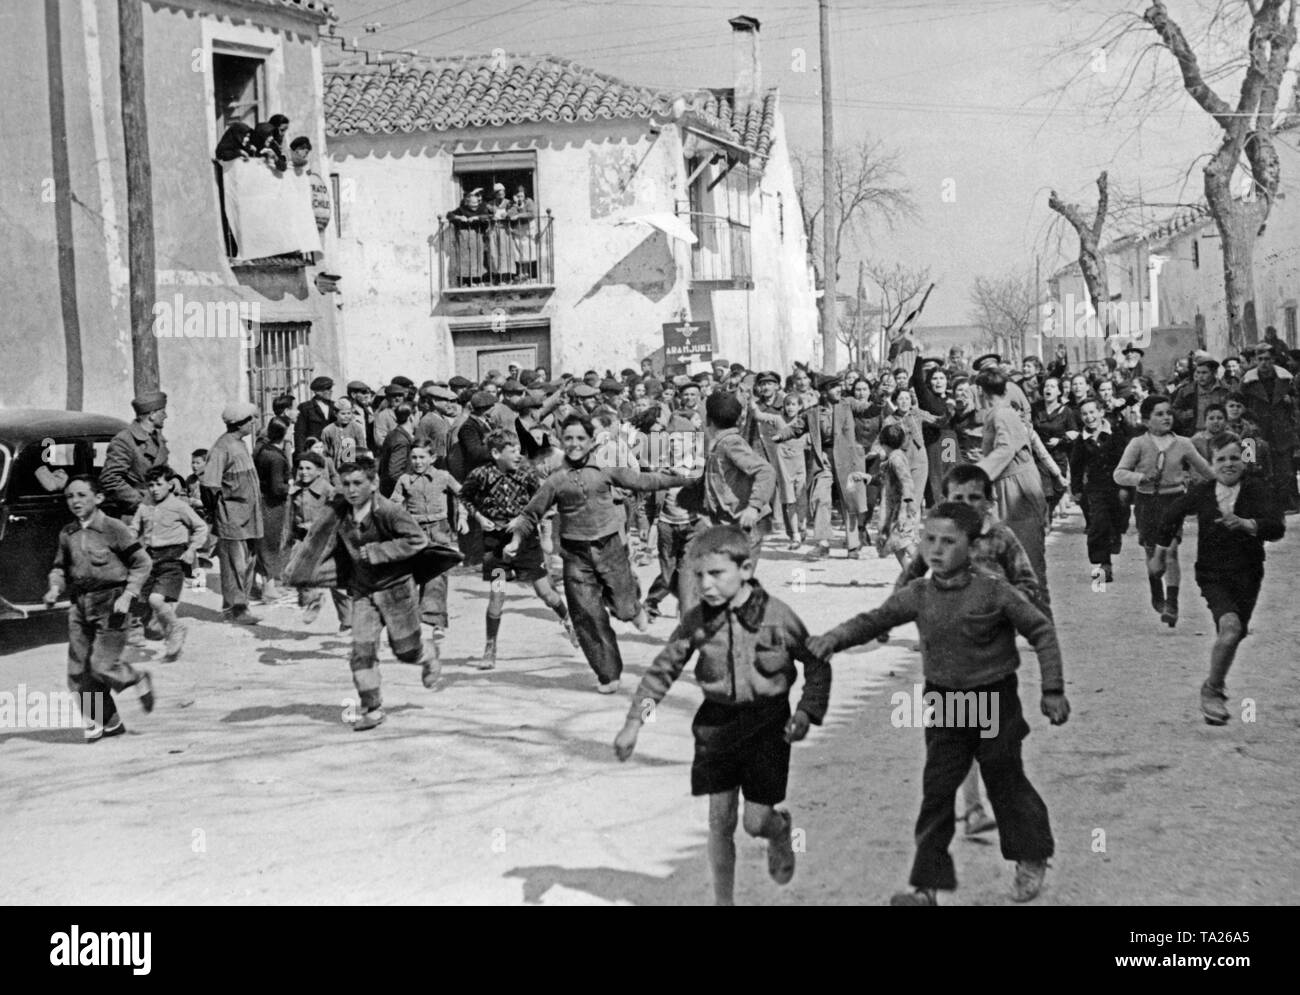 Photo of children and adults in the village of Templique near Madrid, who welcome the Spanish national troops under General Francisco Franco cheerfully. People swing the Bandera, the flag of the Nationalists. On the left on the houses there are white flags (sign of capitulation). Stock Photo